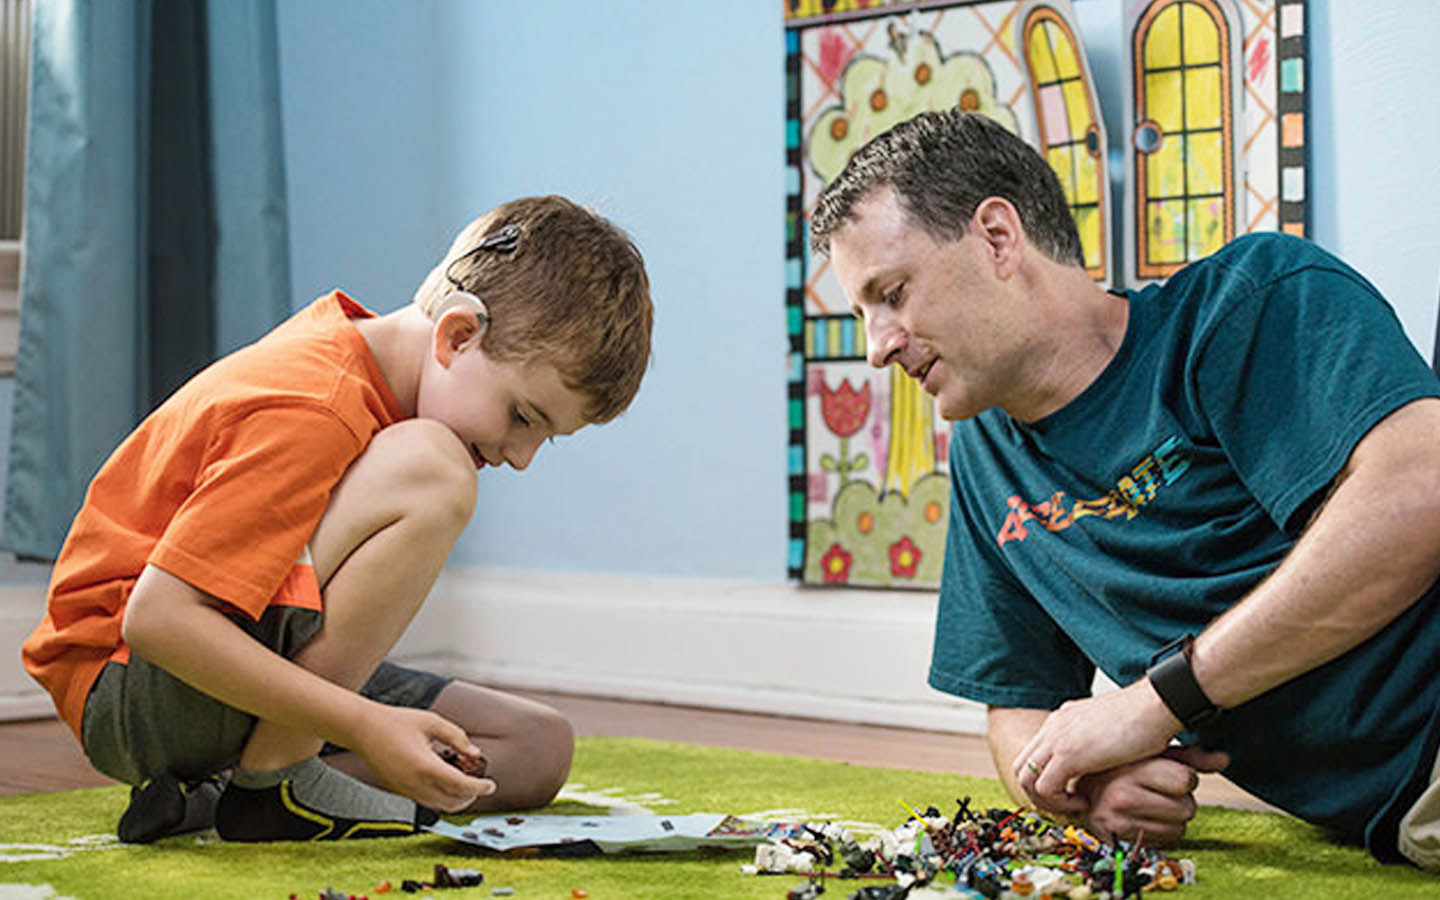 A boy with a Cochlear implant plays on the floor as his dad watches on